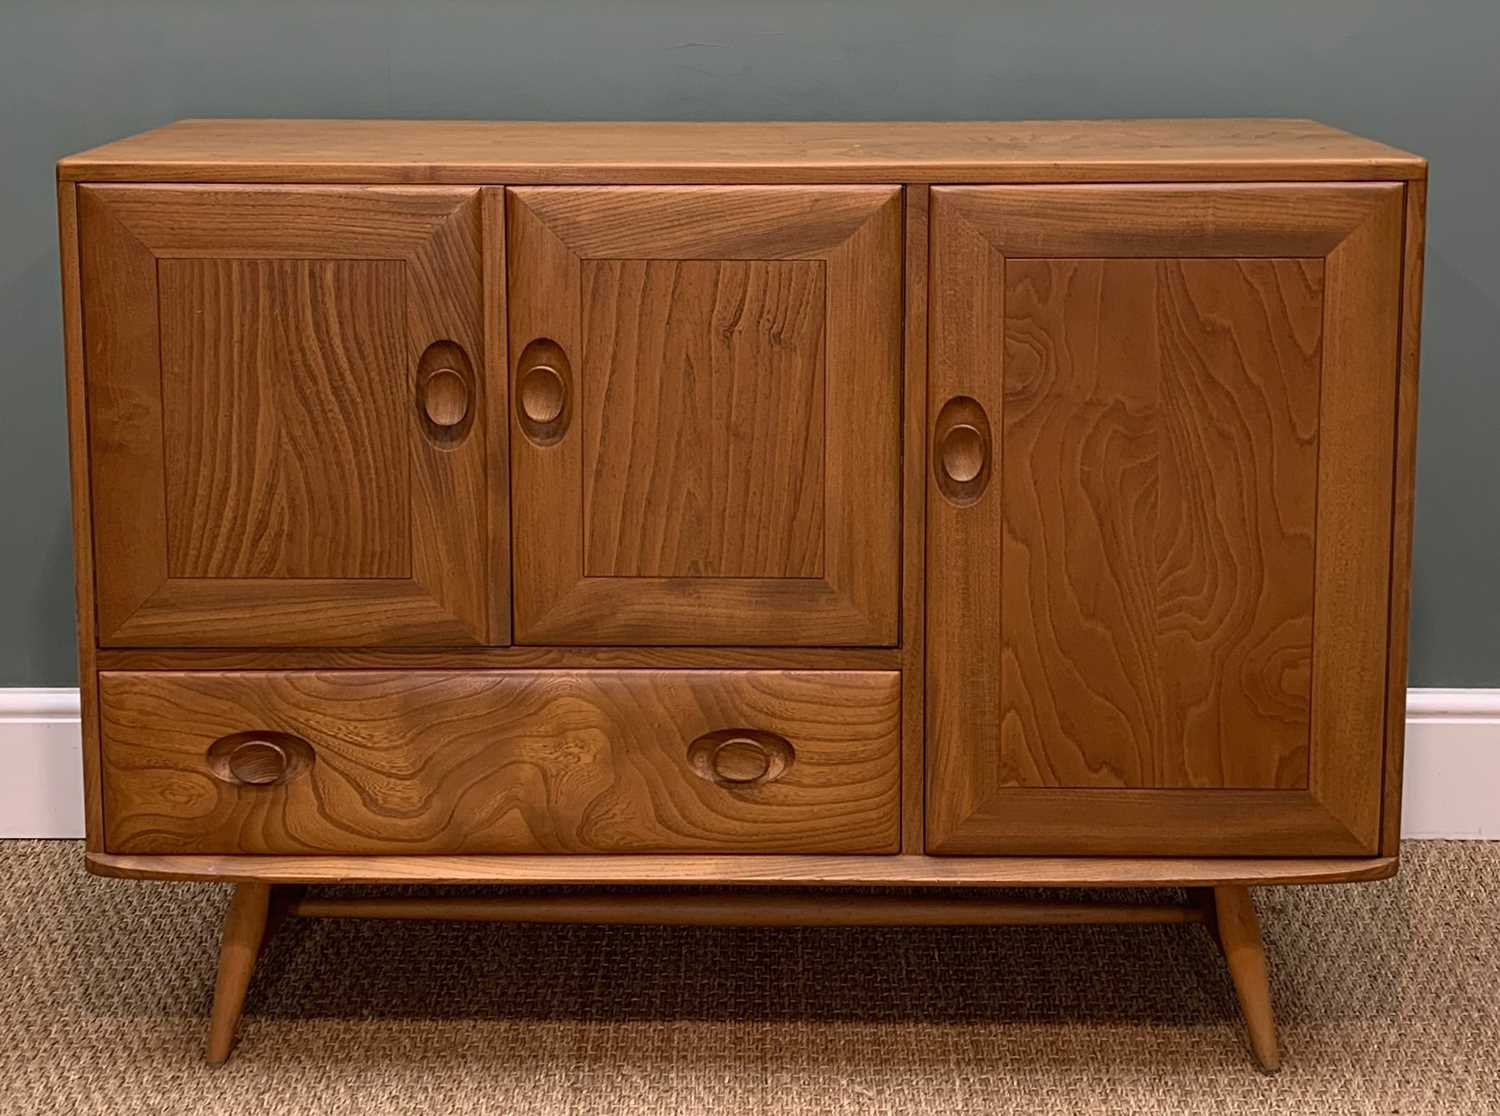 MID-CENTURY ERCOL 467 SIDEBOARD, solid elm and beech, natural wax finish, lift-out cutlery tray with - Image 2 of 7